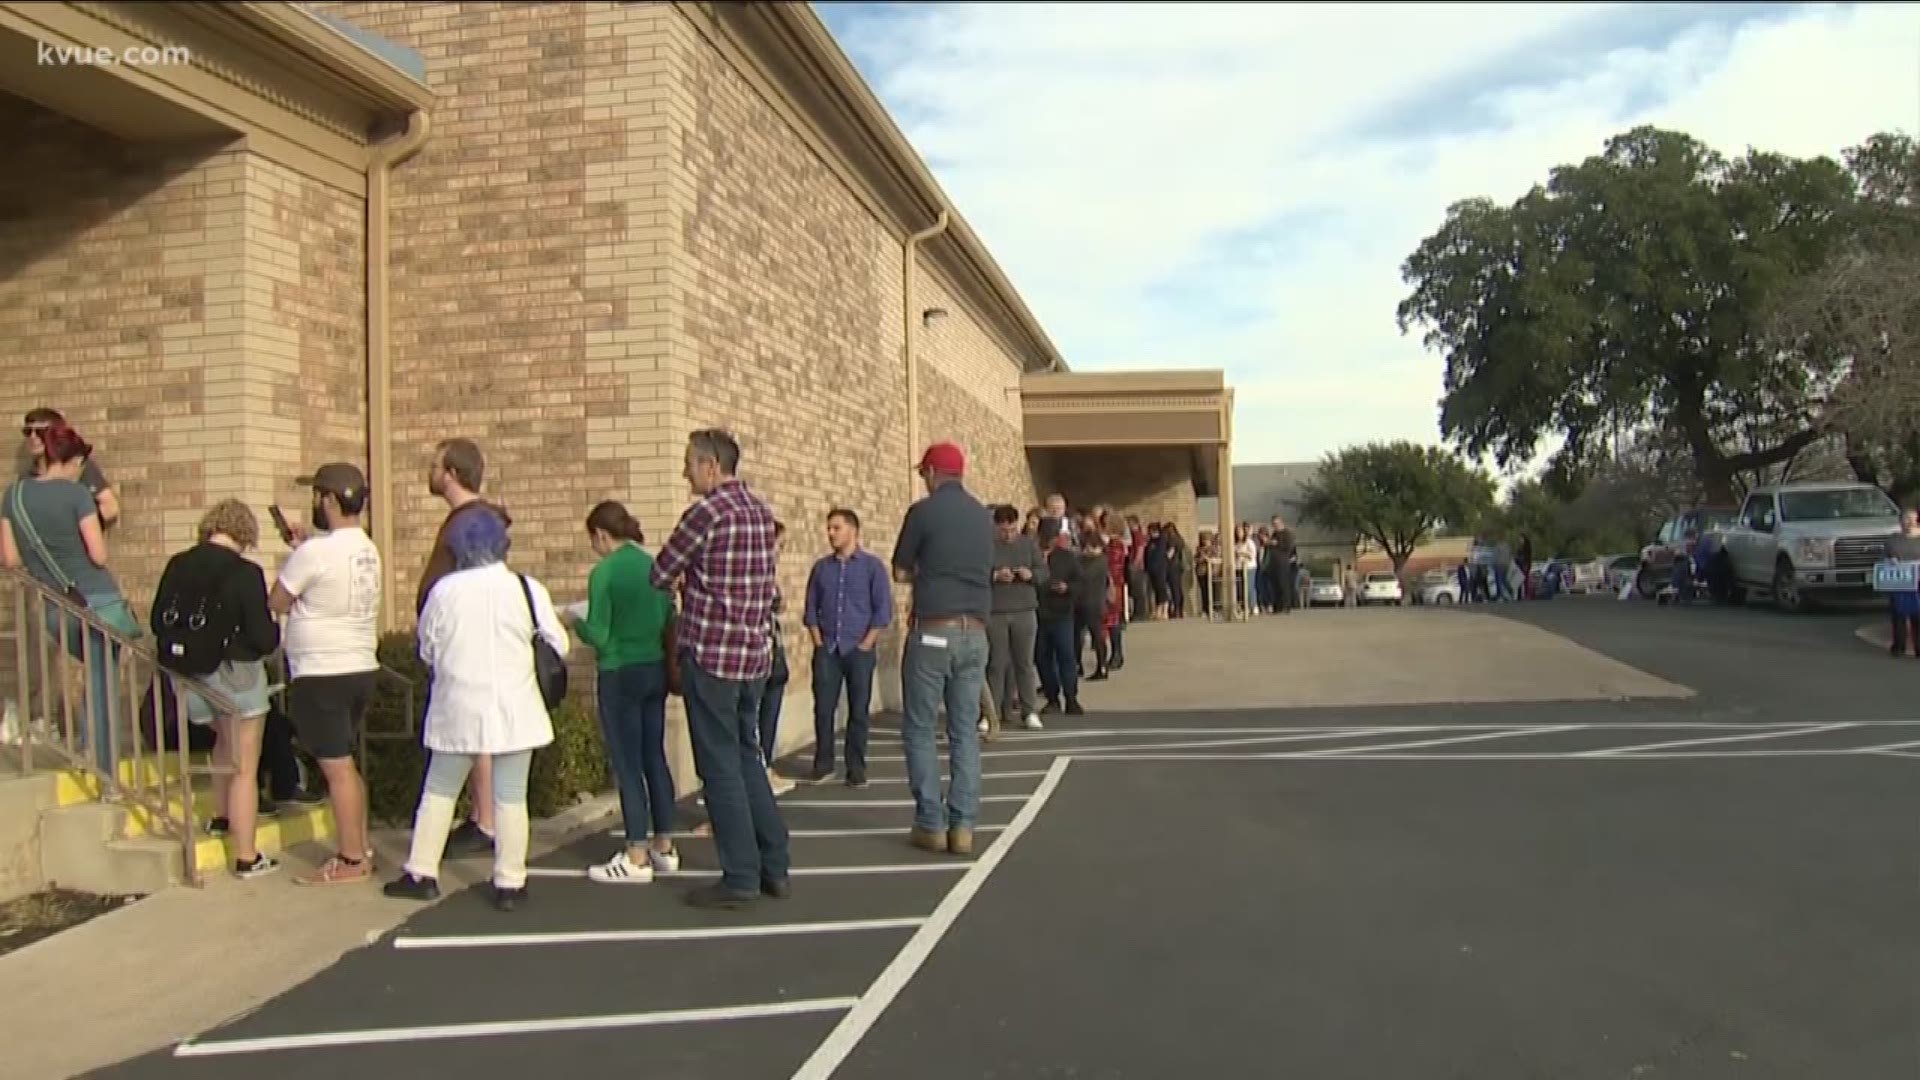 The county broke its record for early voting turnout in a primary election.